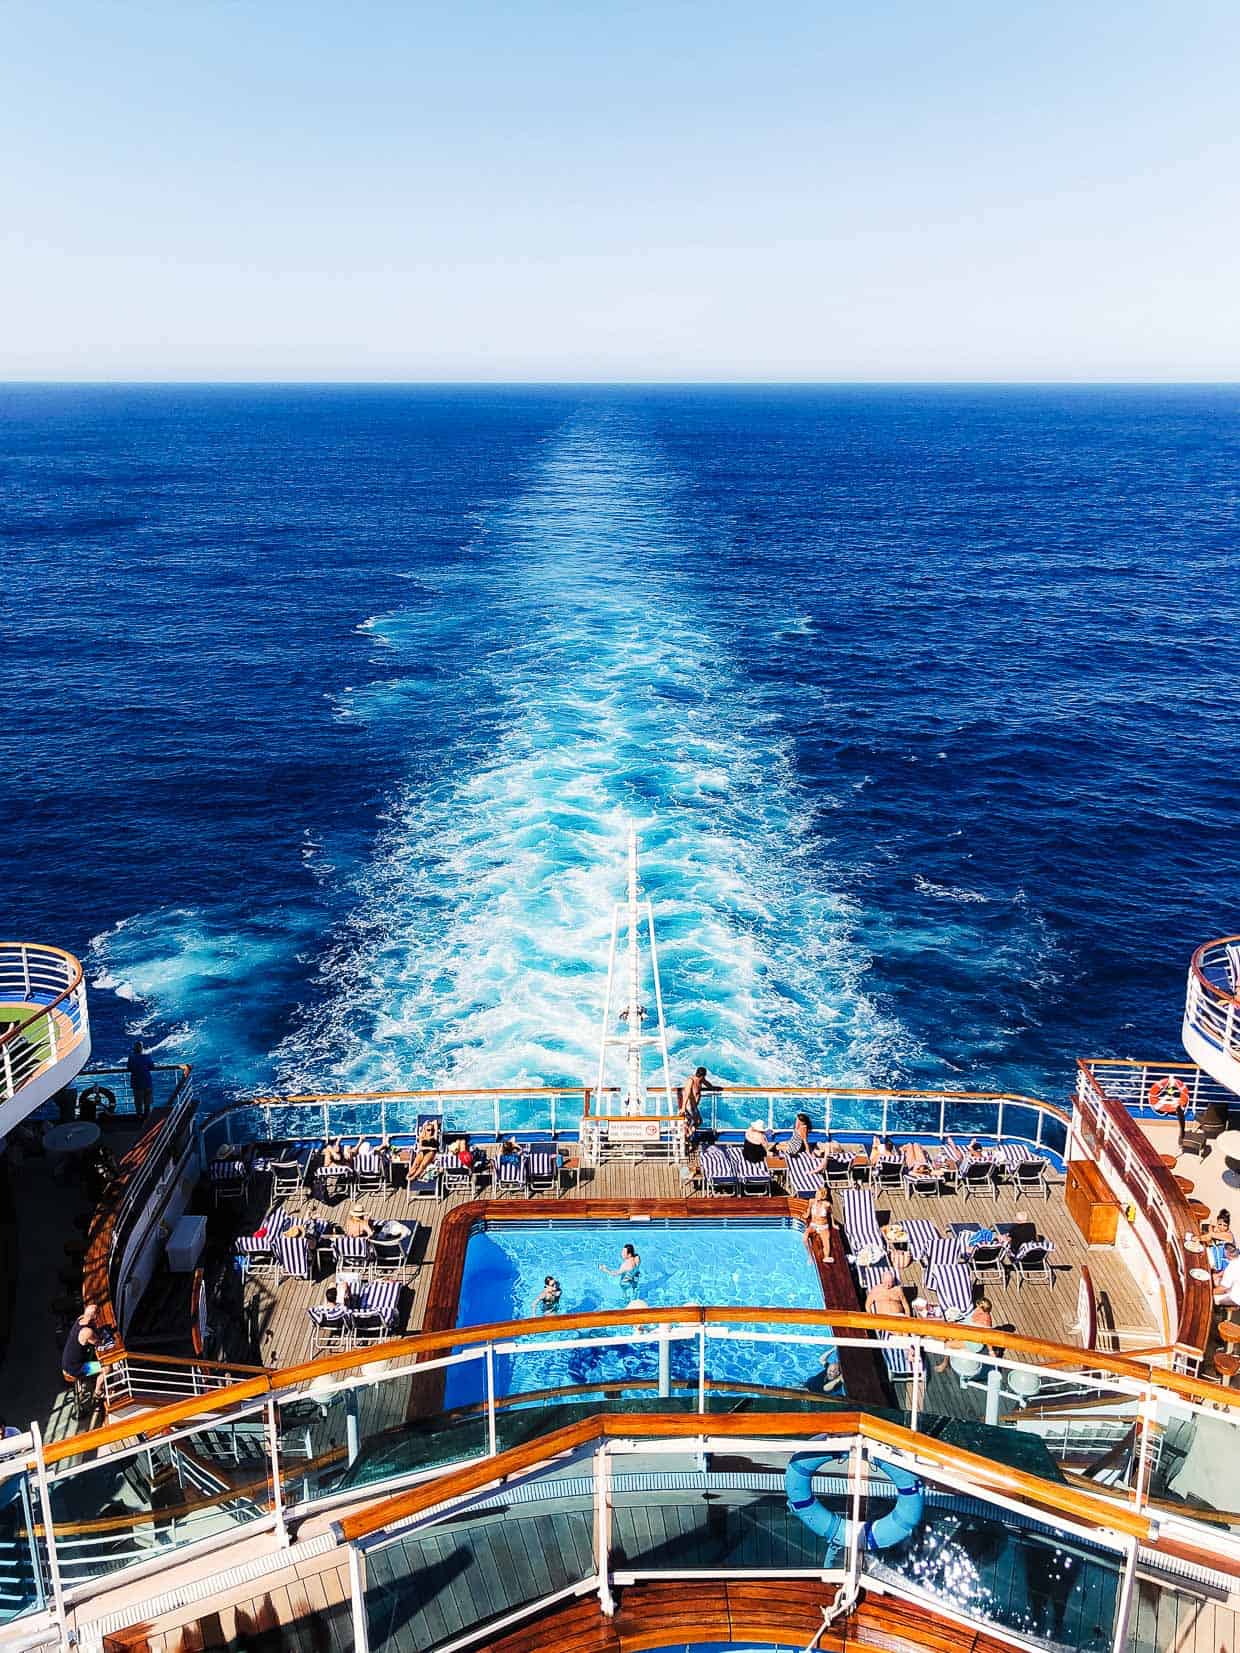 The on board view while cruising the Mexican Riviera with Princess Cruises.